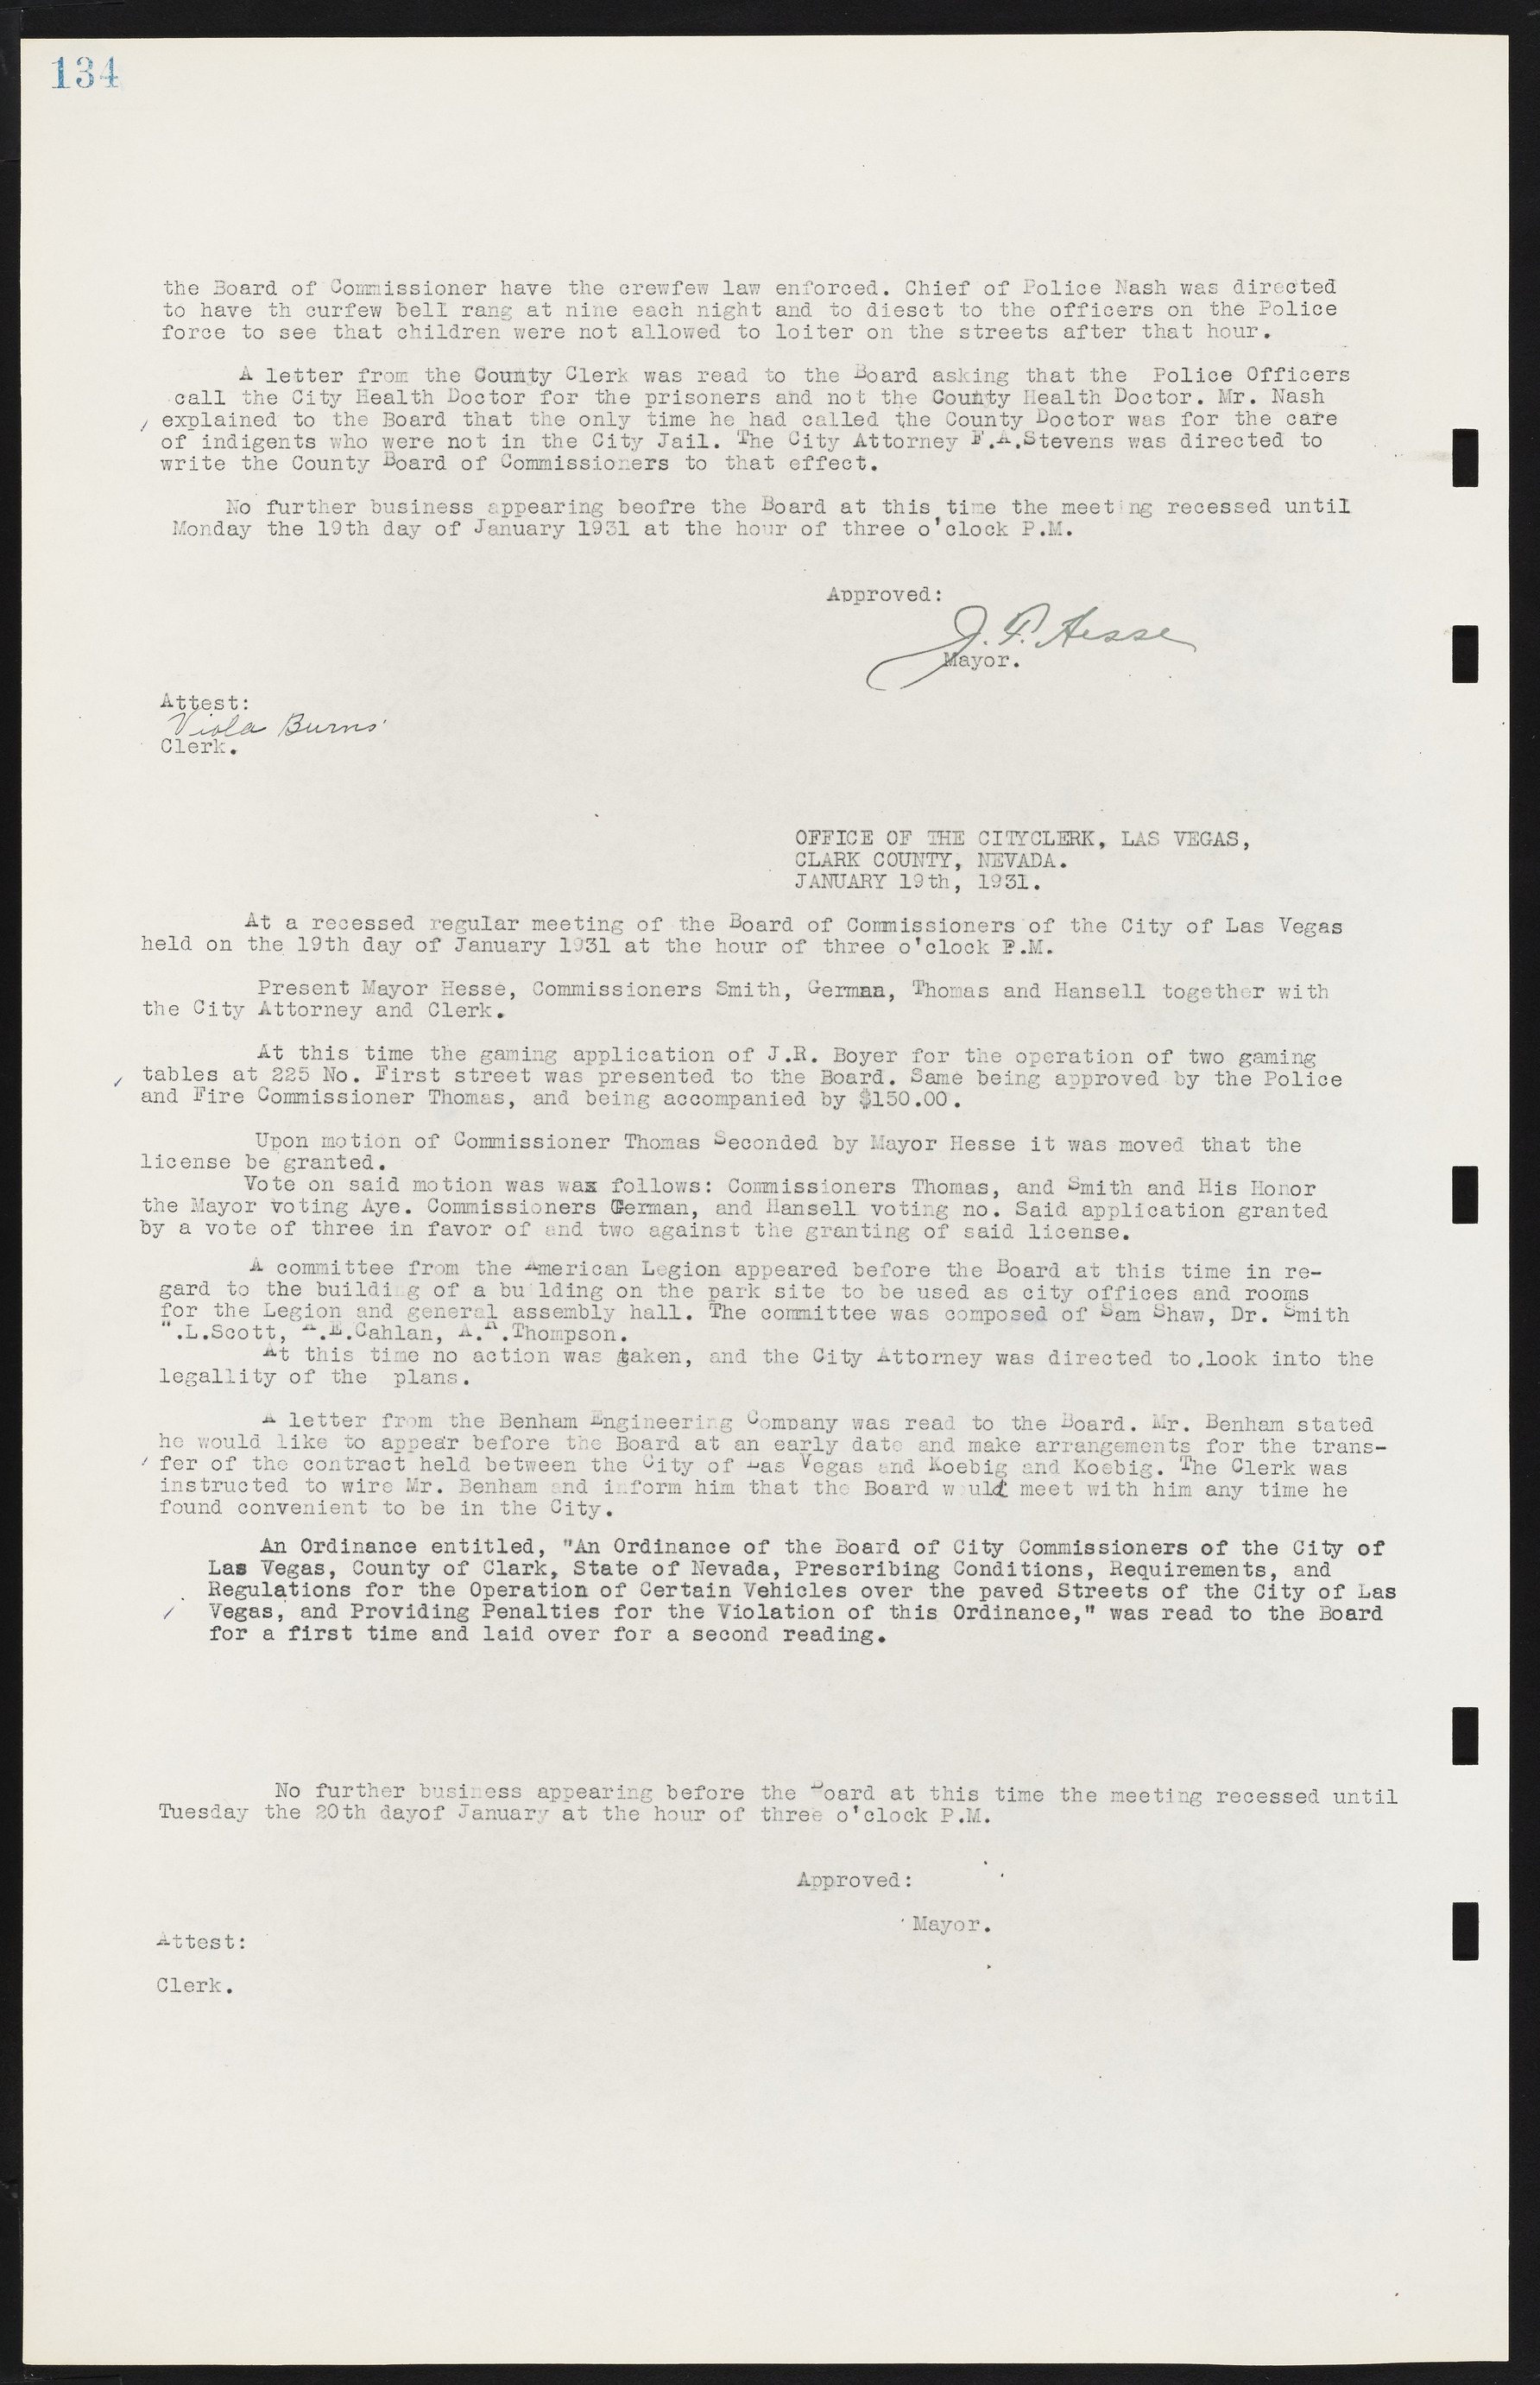 Las Vegas City Commission Minutes, May 14, 1929 to February 11, 1937, lvc000003-140